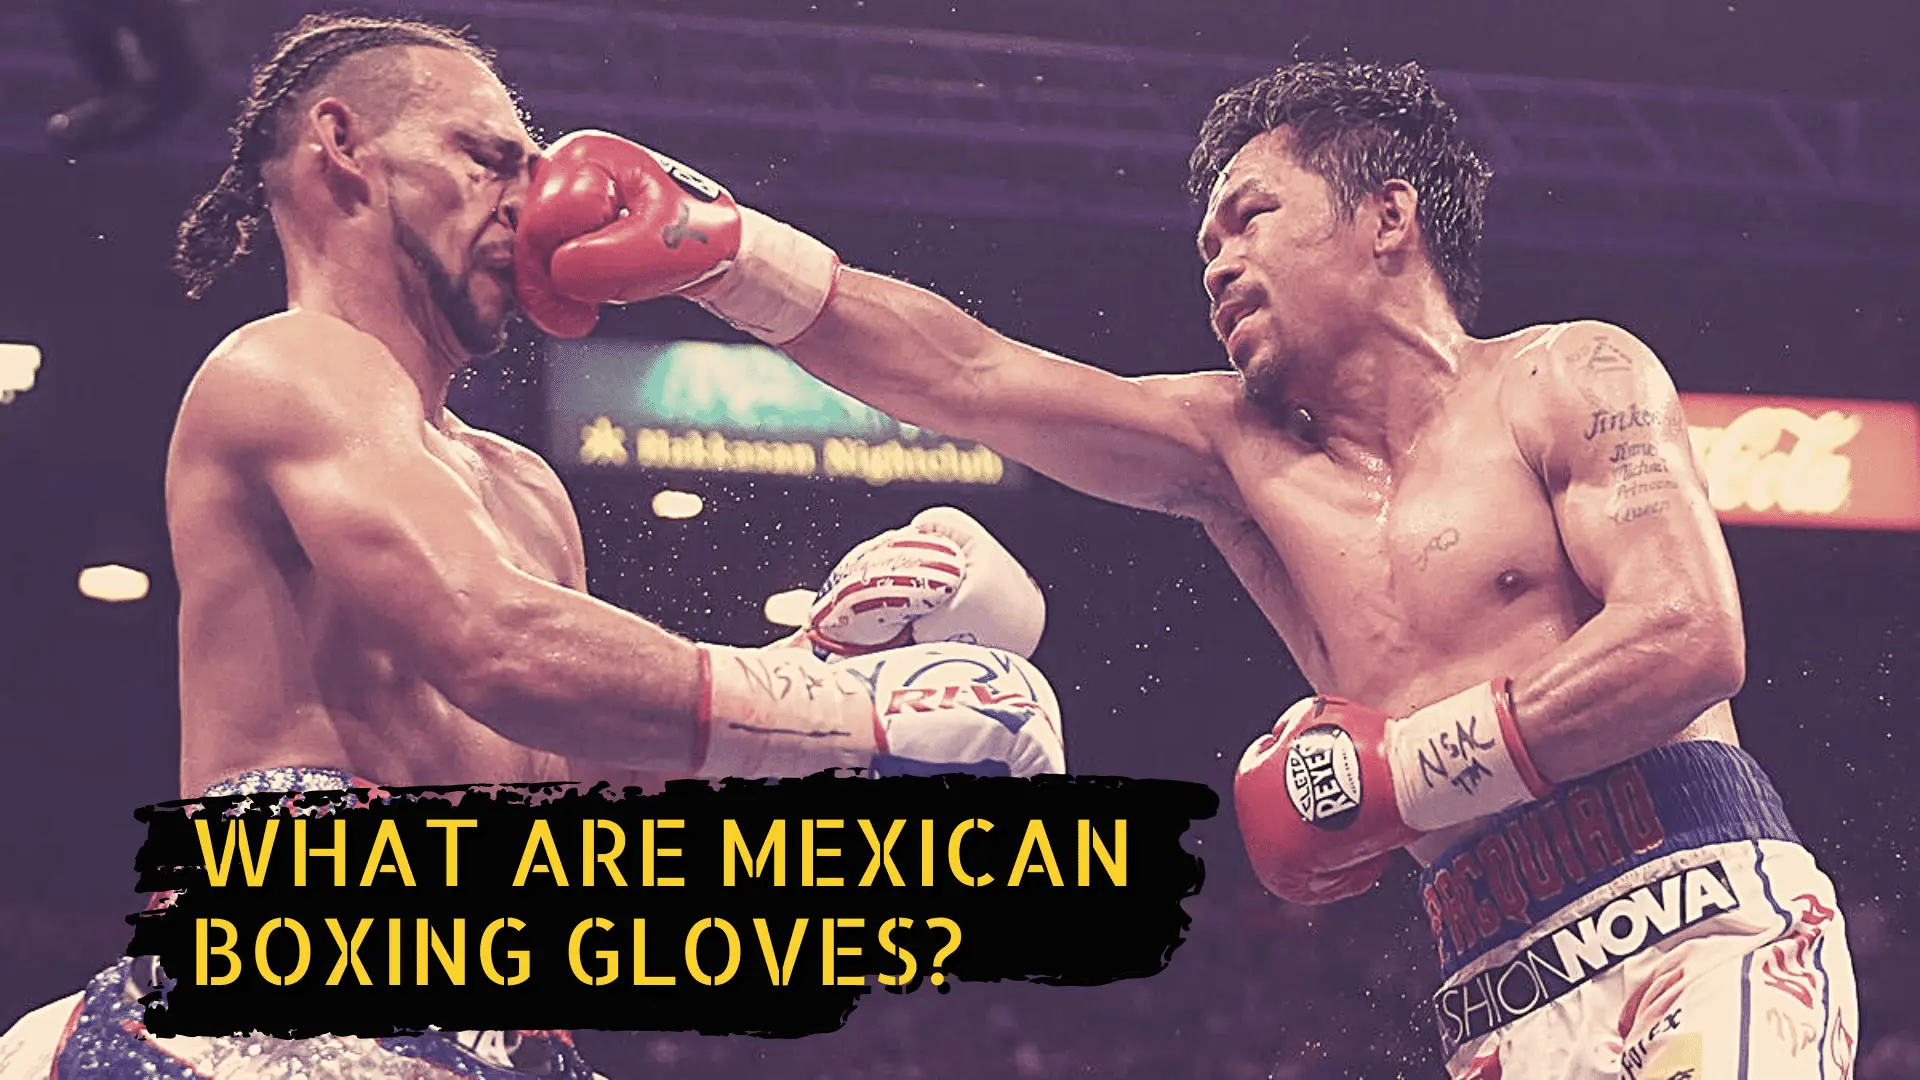 What are Mexican boxing gloves?